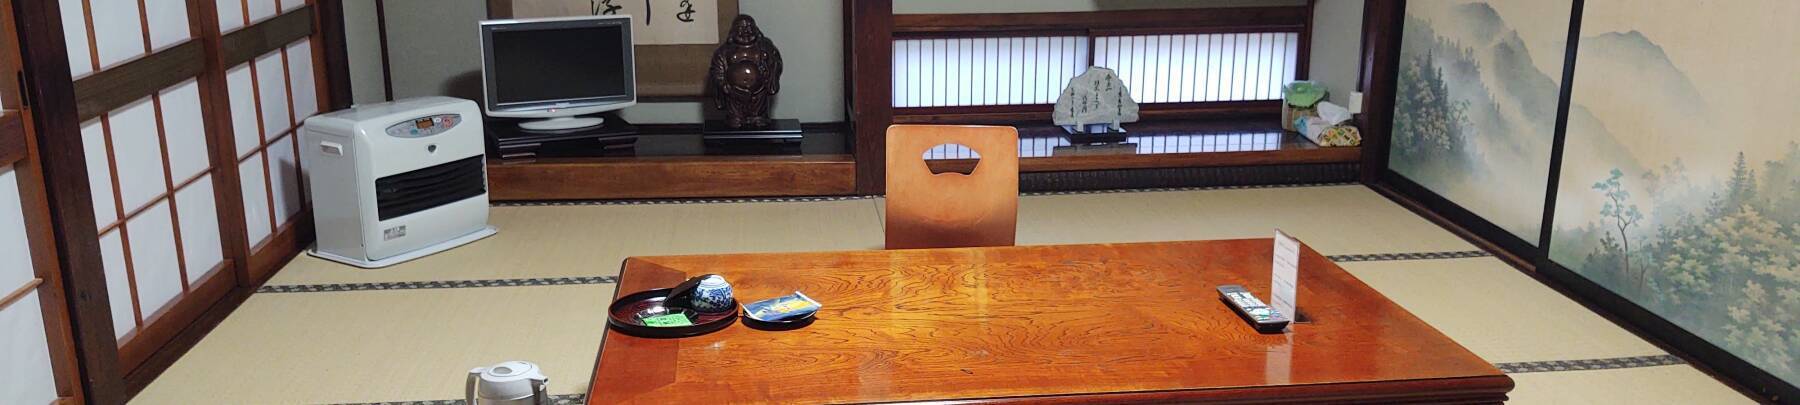 Tatami mat room with paper sliding doors, low table, and heater.